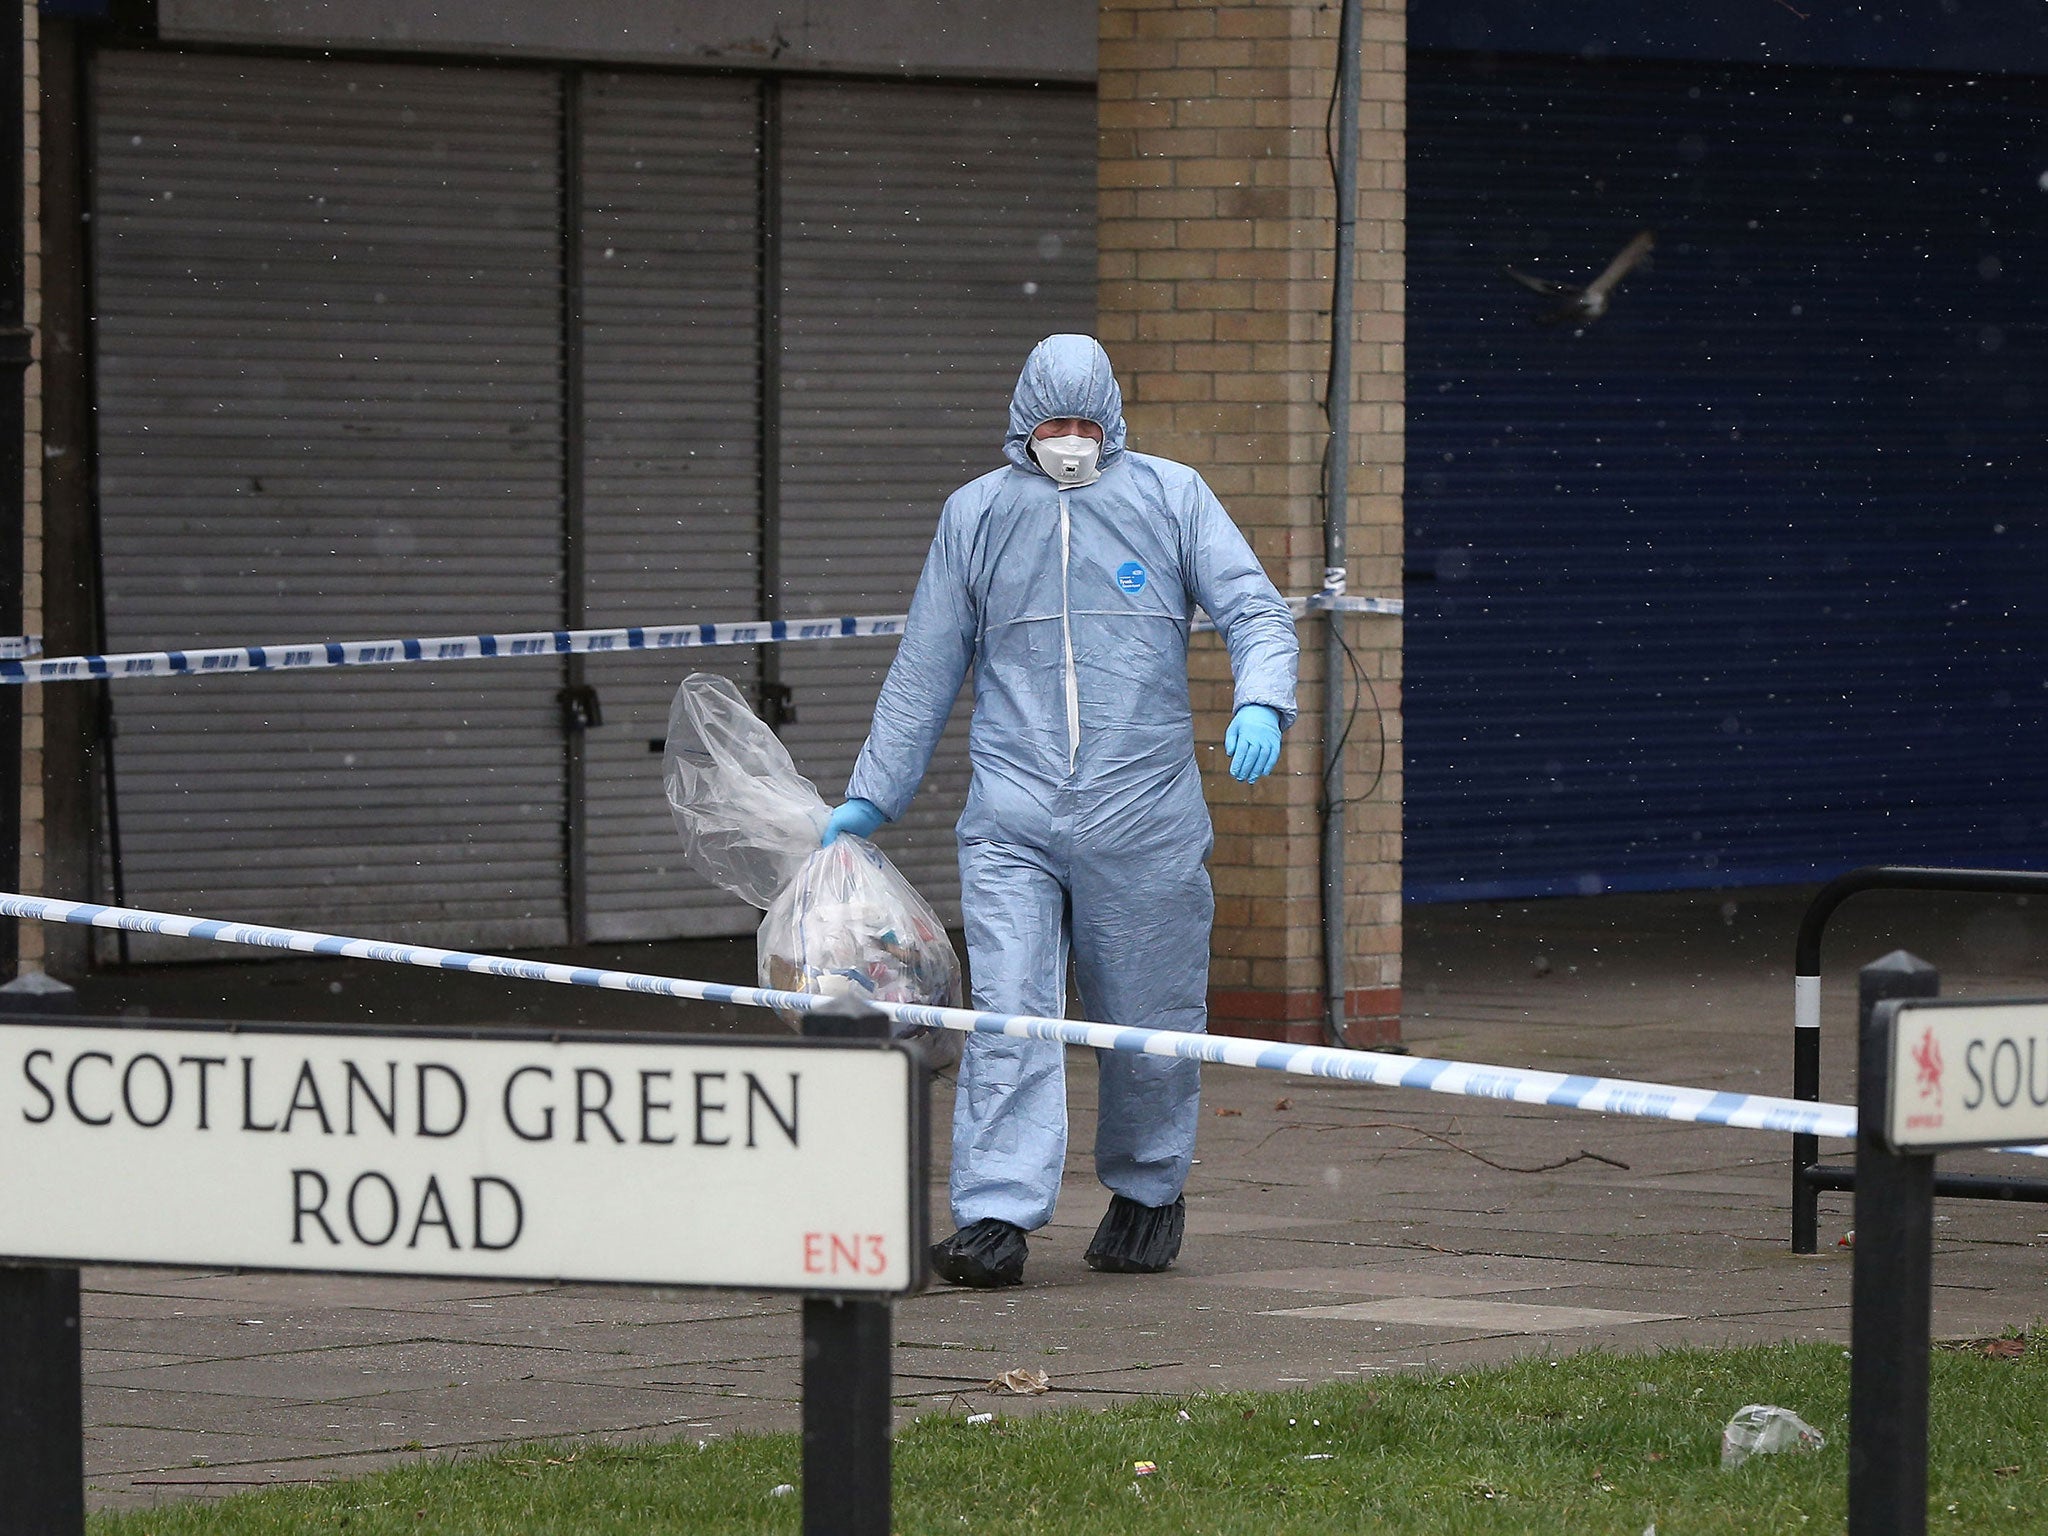 Police at the scene in Enfield, north London where a man died after being found shot and stabbed in the street on 17 March